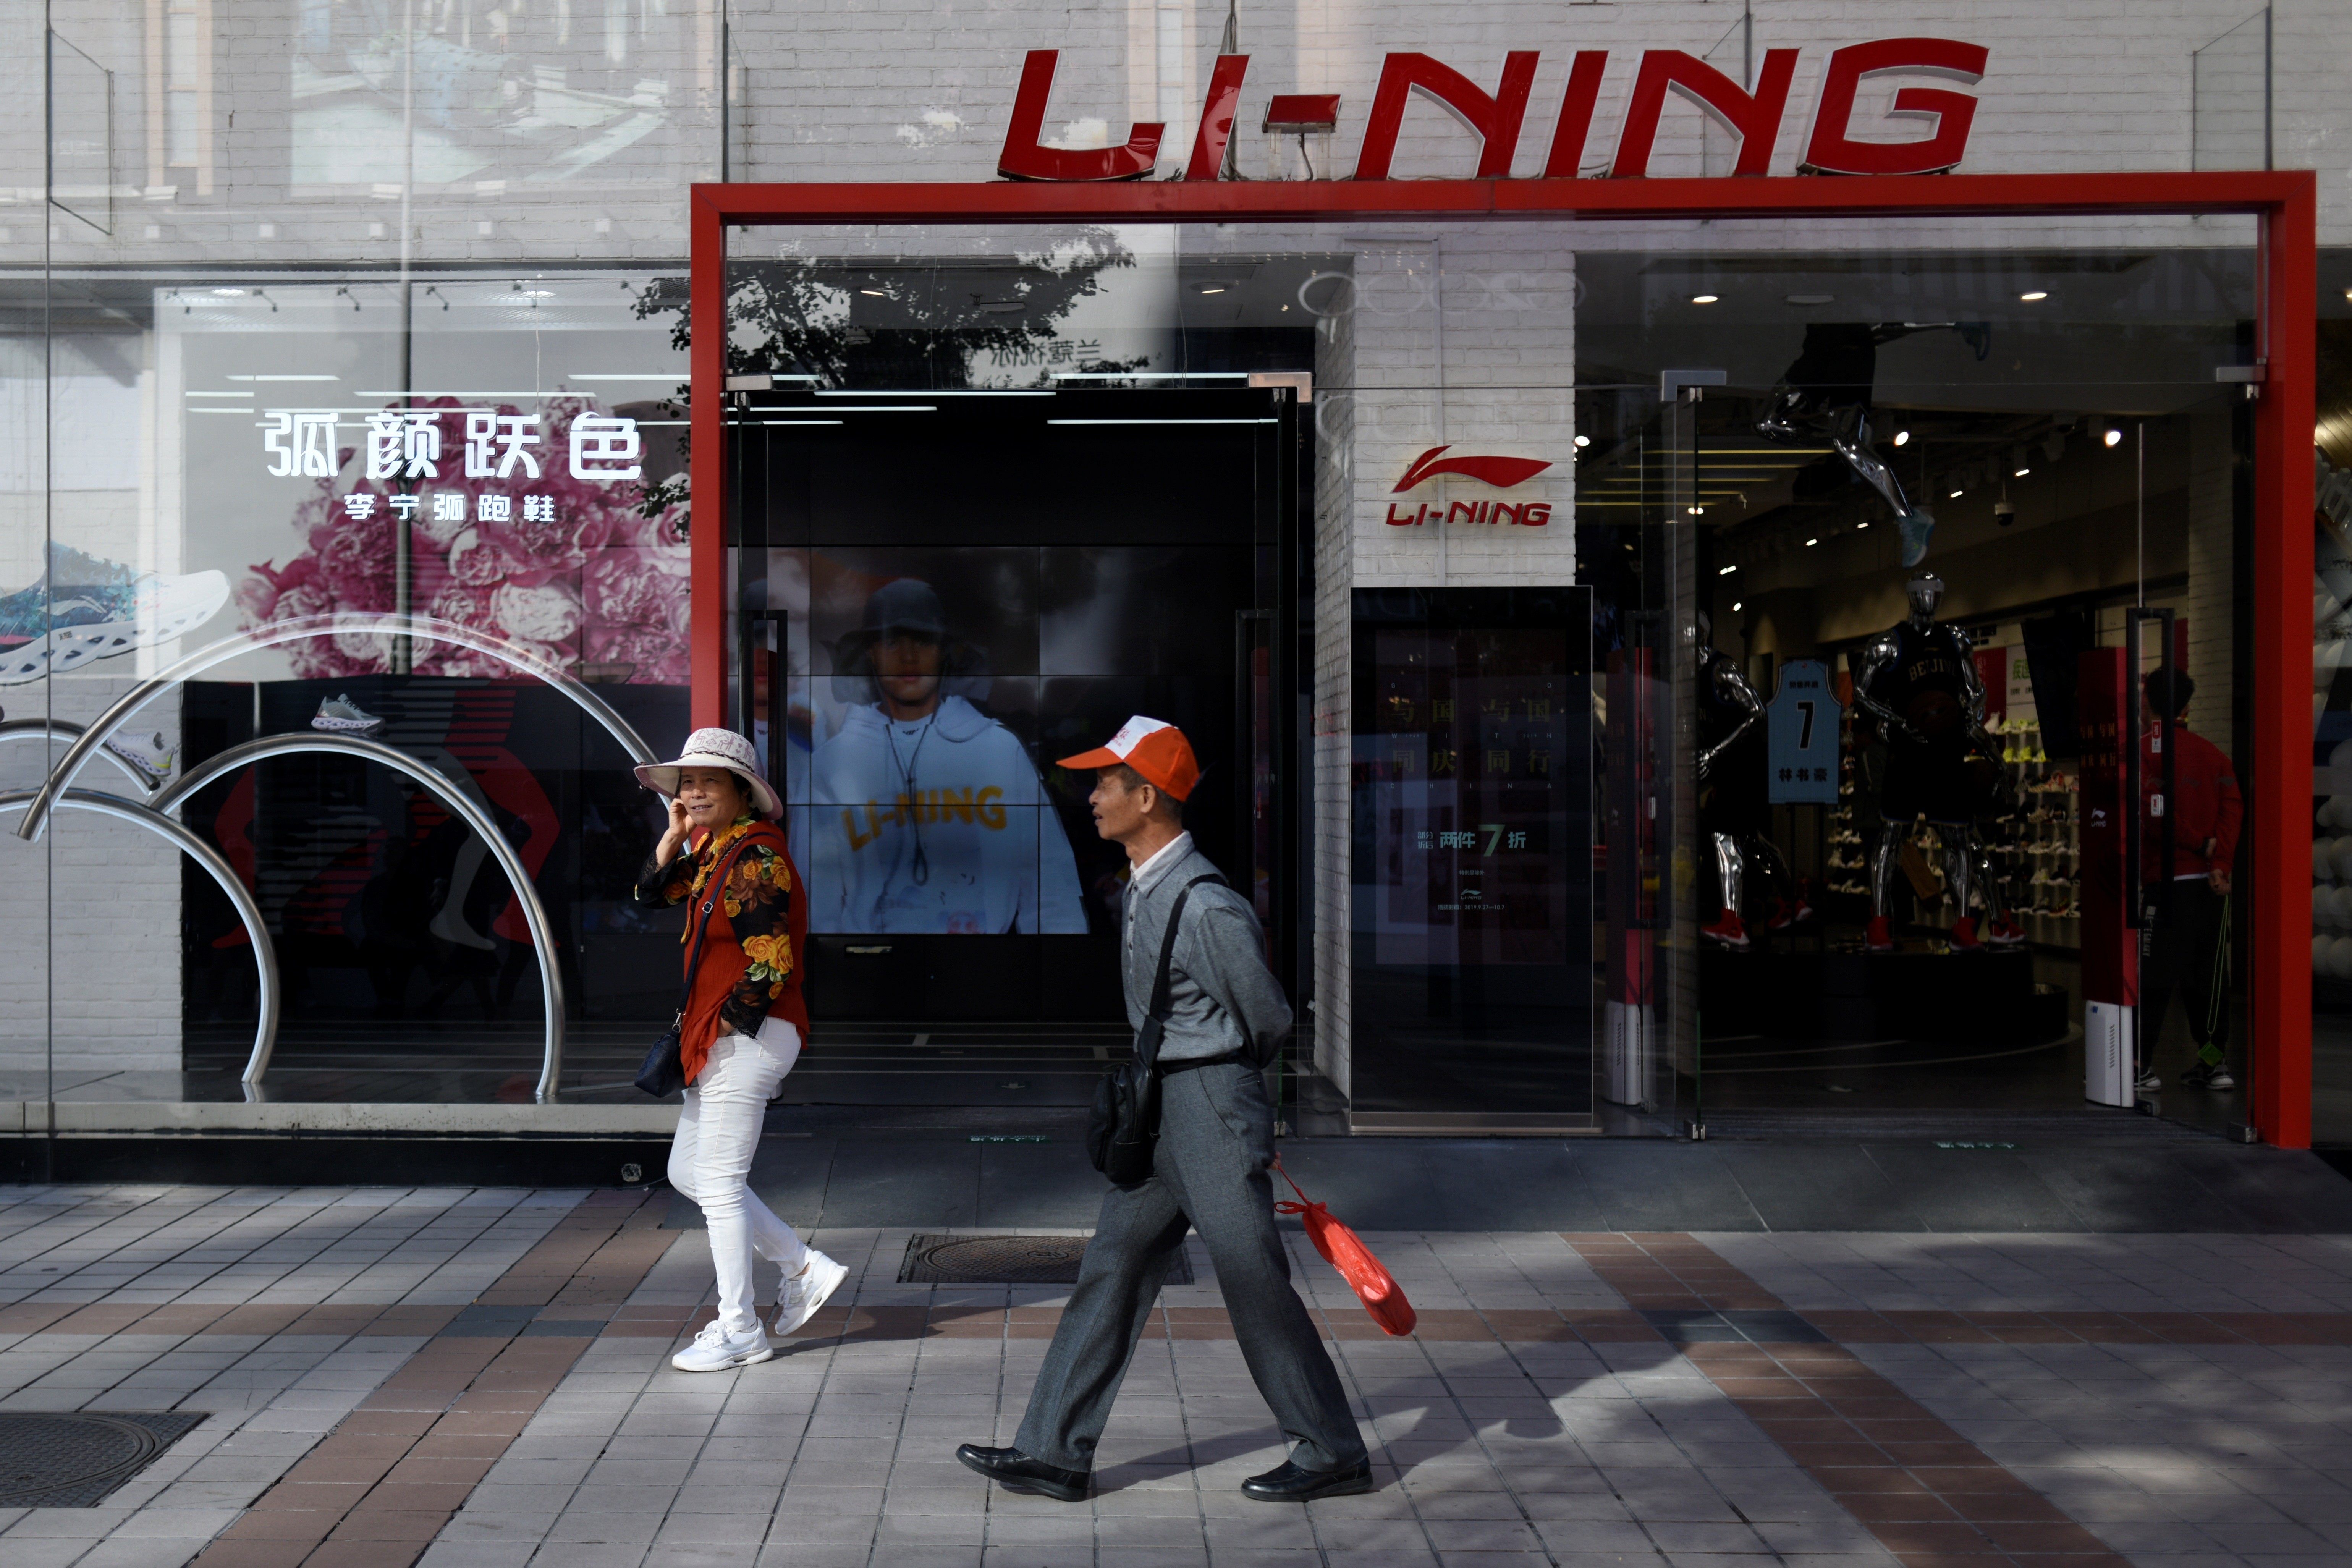 People walk past a Li-Ning store in Beijing on October 8, 2019. (Photo by WANG Zhao / AFP)